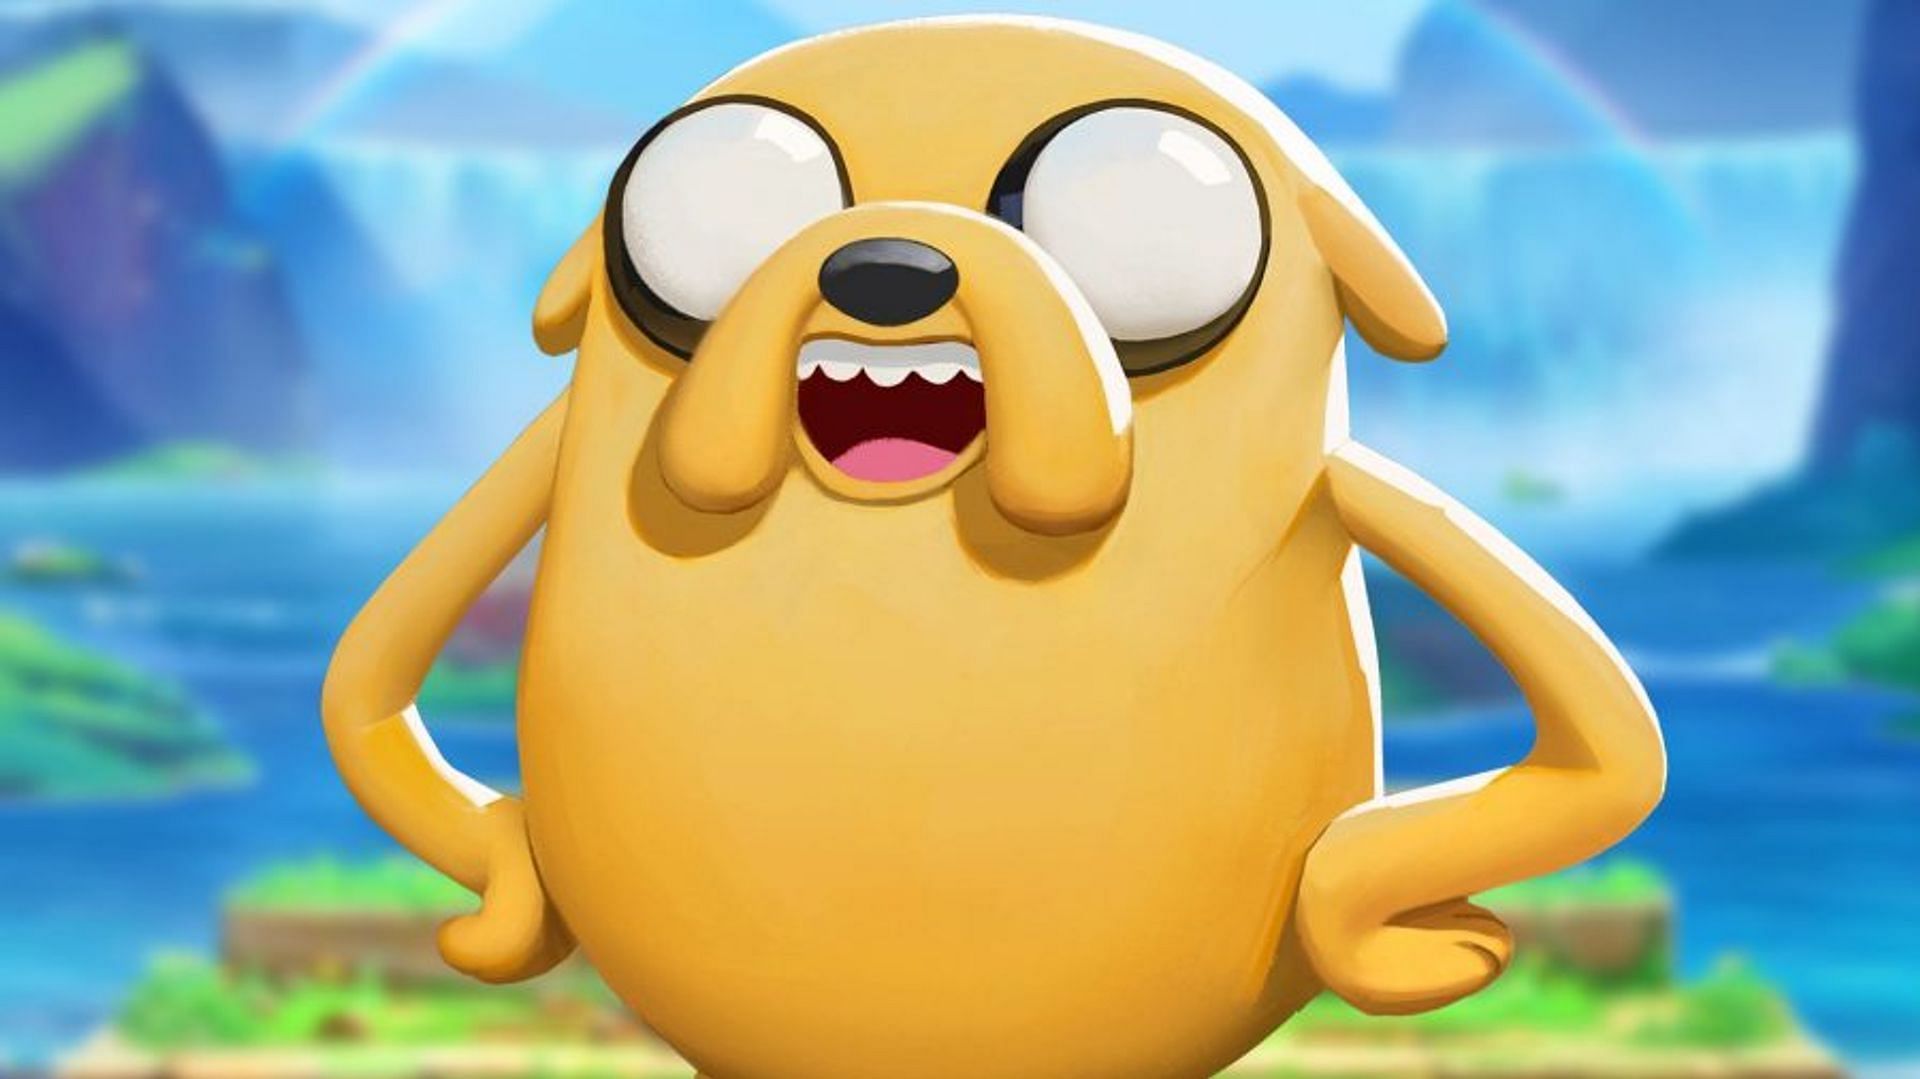 Jake the Dog as he appears in MultiVersus (Image via Warner Bros. Interactive Entertainment)